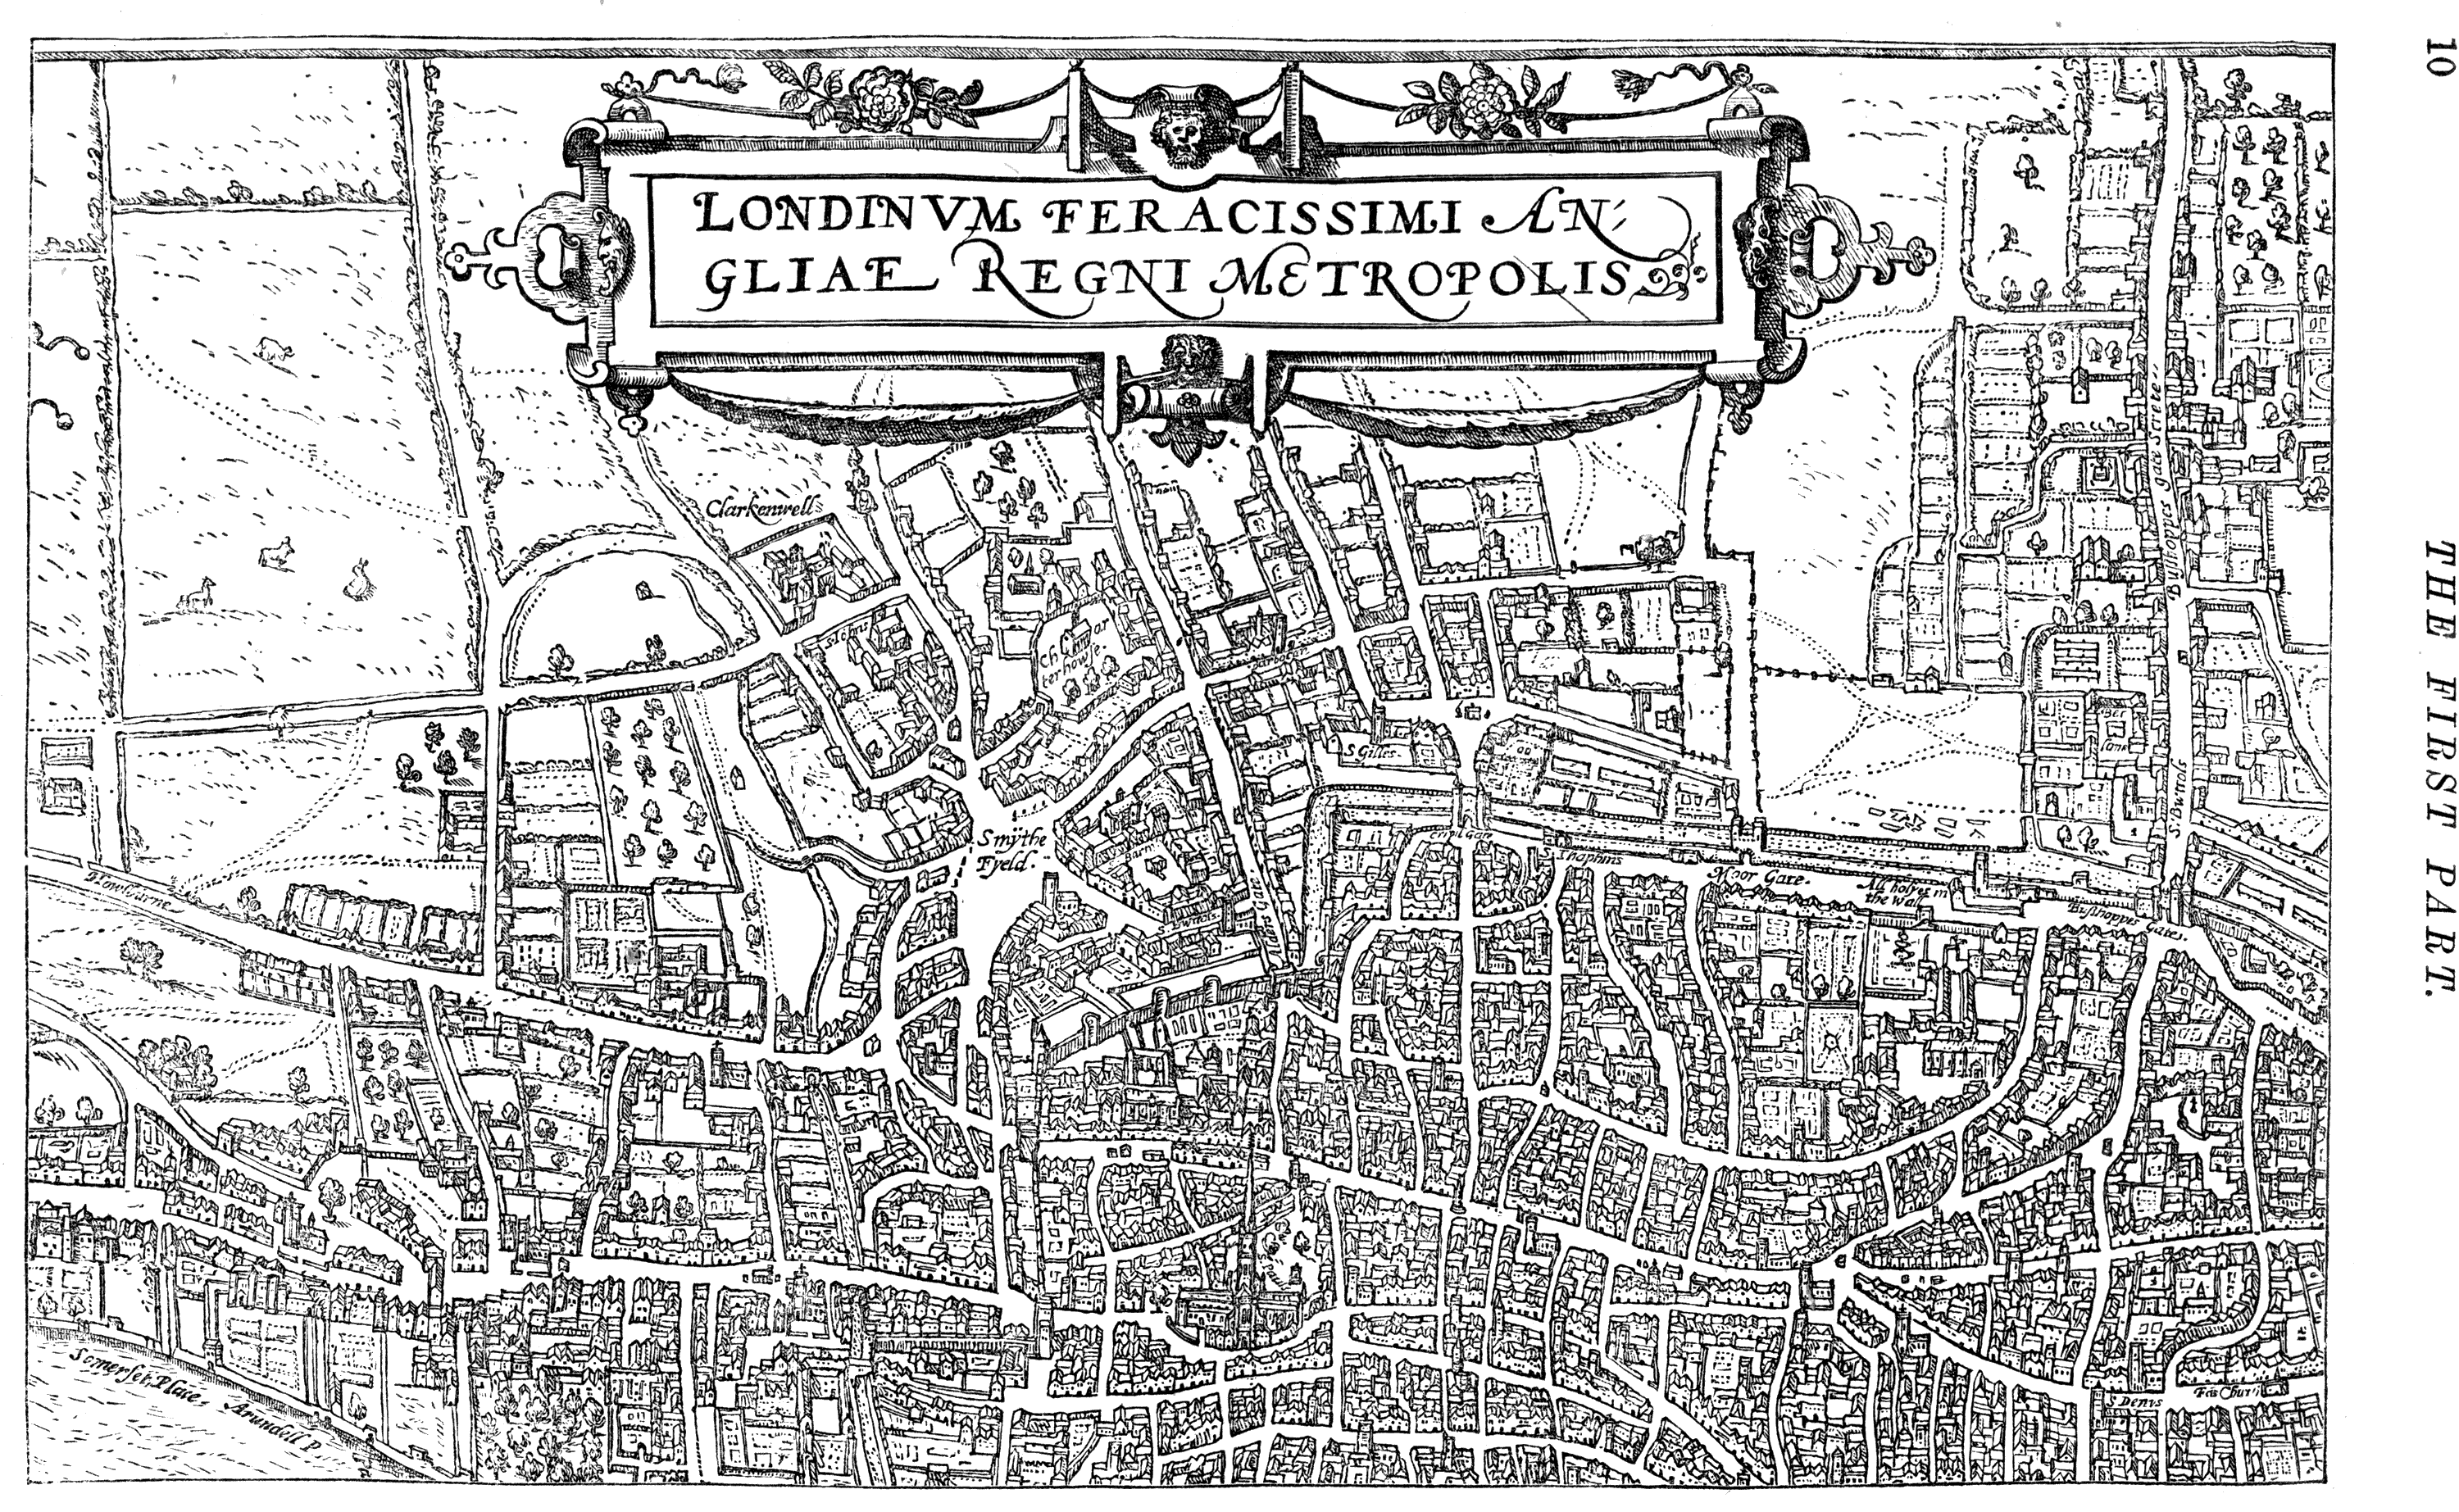 Map of London by Braun, 1574. From James Halliwell 'Illustrations of the life of Shakespeare' (1874), page 10, published size in Halliwell 23.8cm wide by 15cm high.